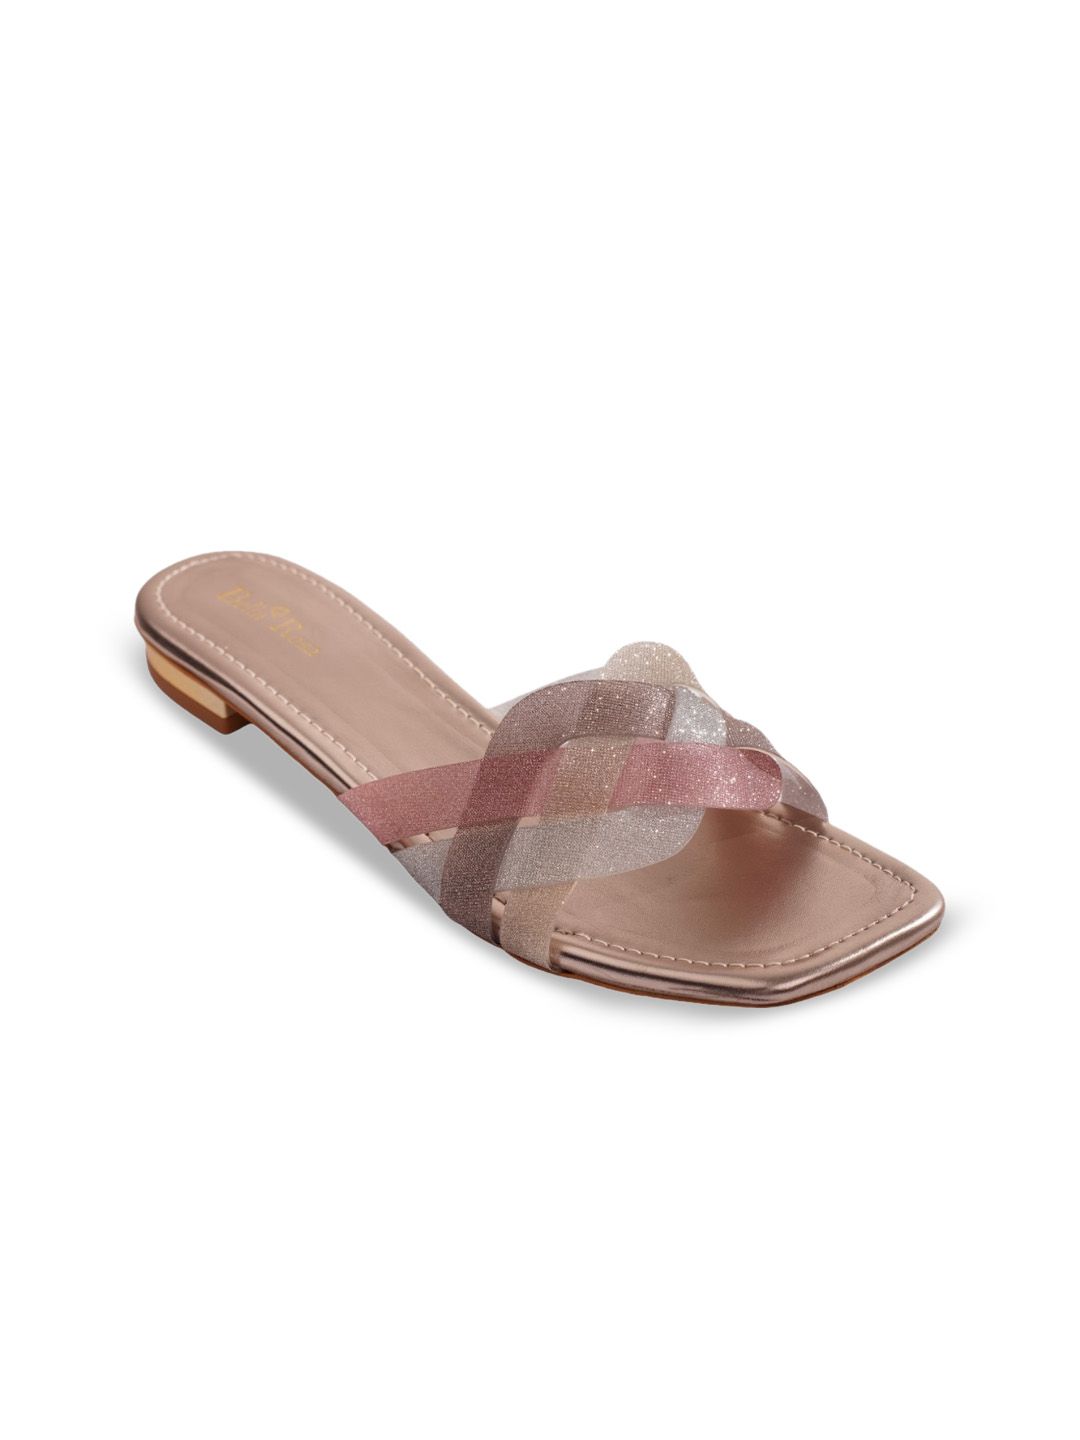 Bella Rosa Women Gold-Toned Textured Party Fashion Flats Price in India